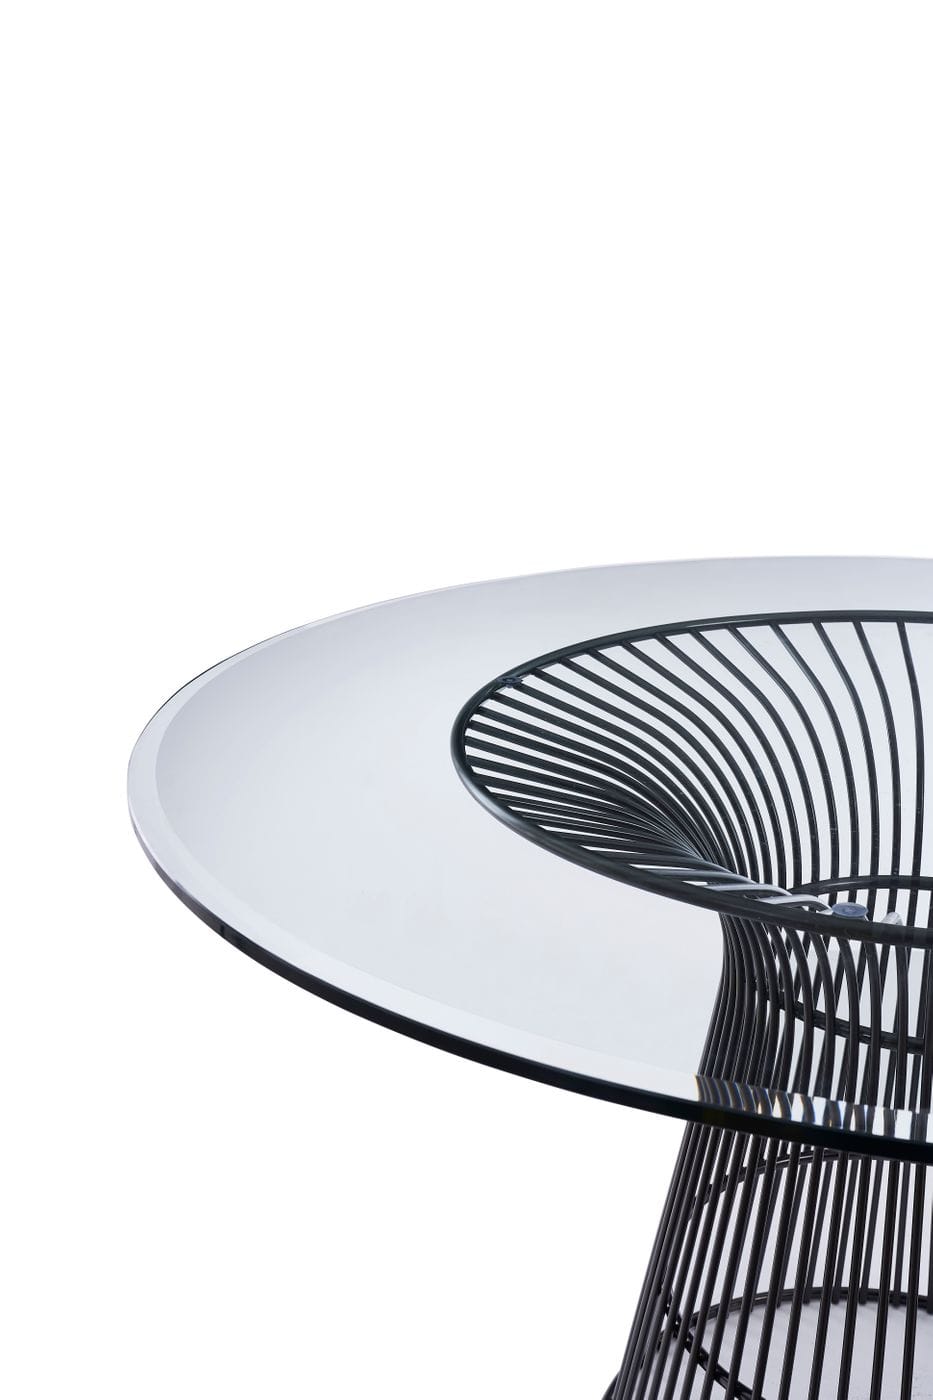 Modrest Chandler - Modern Round Glass & Black Stainless Steel Dining Table-Dining Table-VIG-Wall2Wall Furnishings